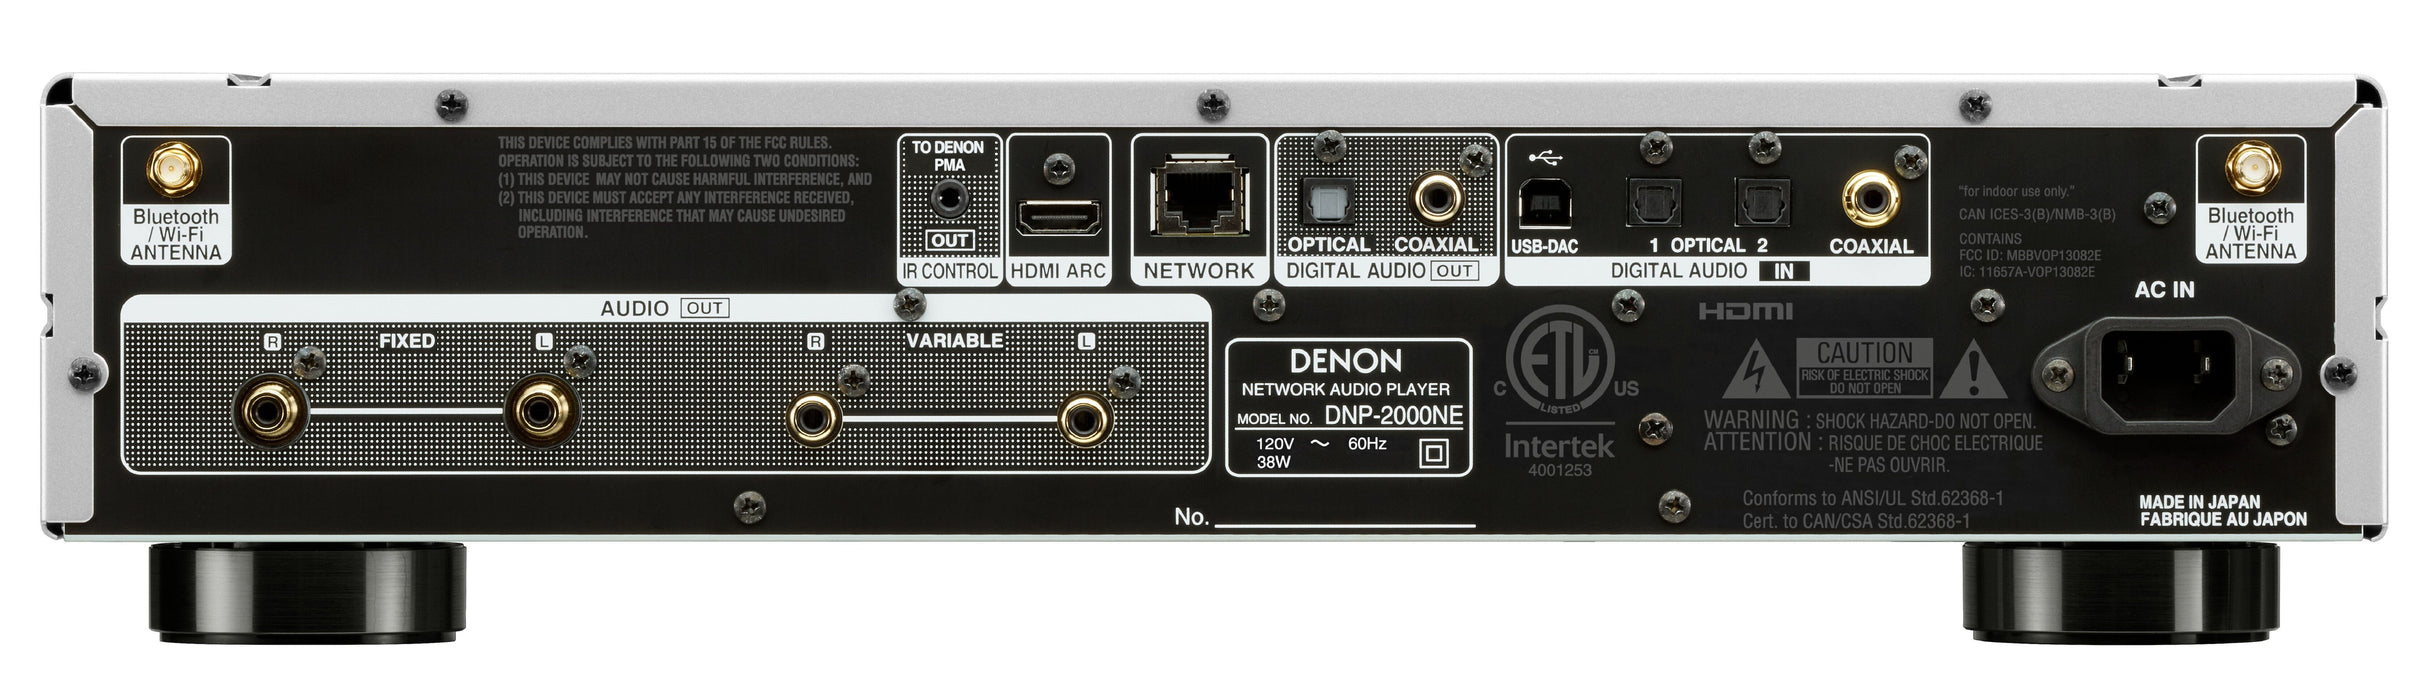 Denon DNP-2000NE High-Resolution Audio Streamer with HEOS Built-in Open Box - Safe and Sound HQ